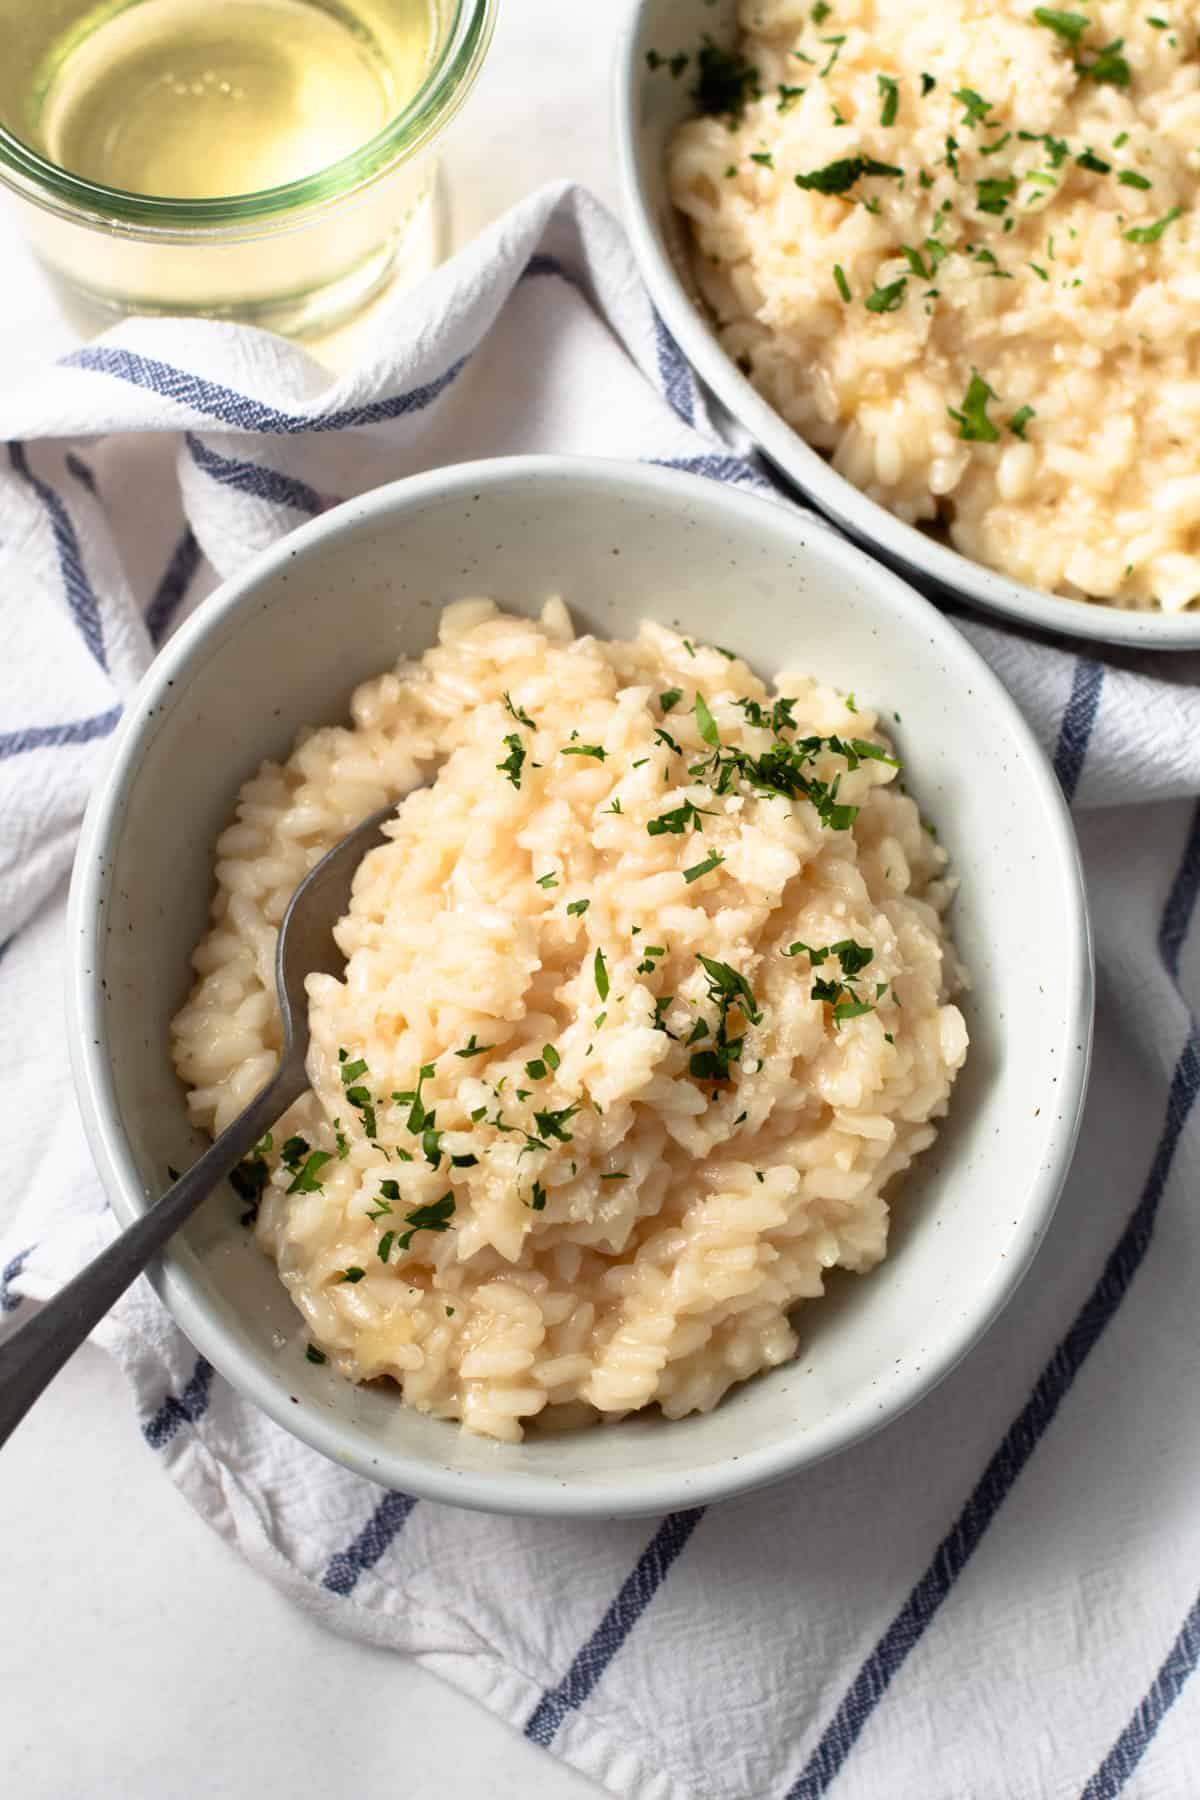 Two bowls of creamy risotto.